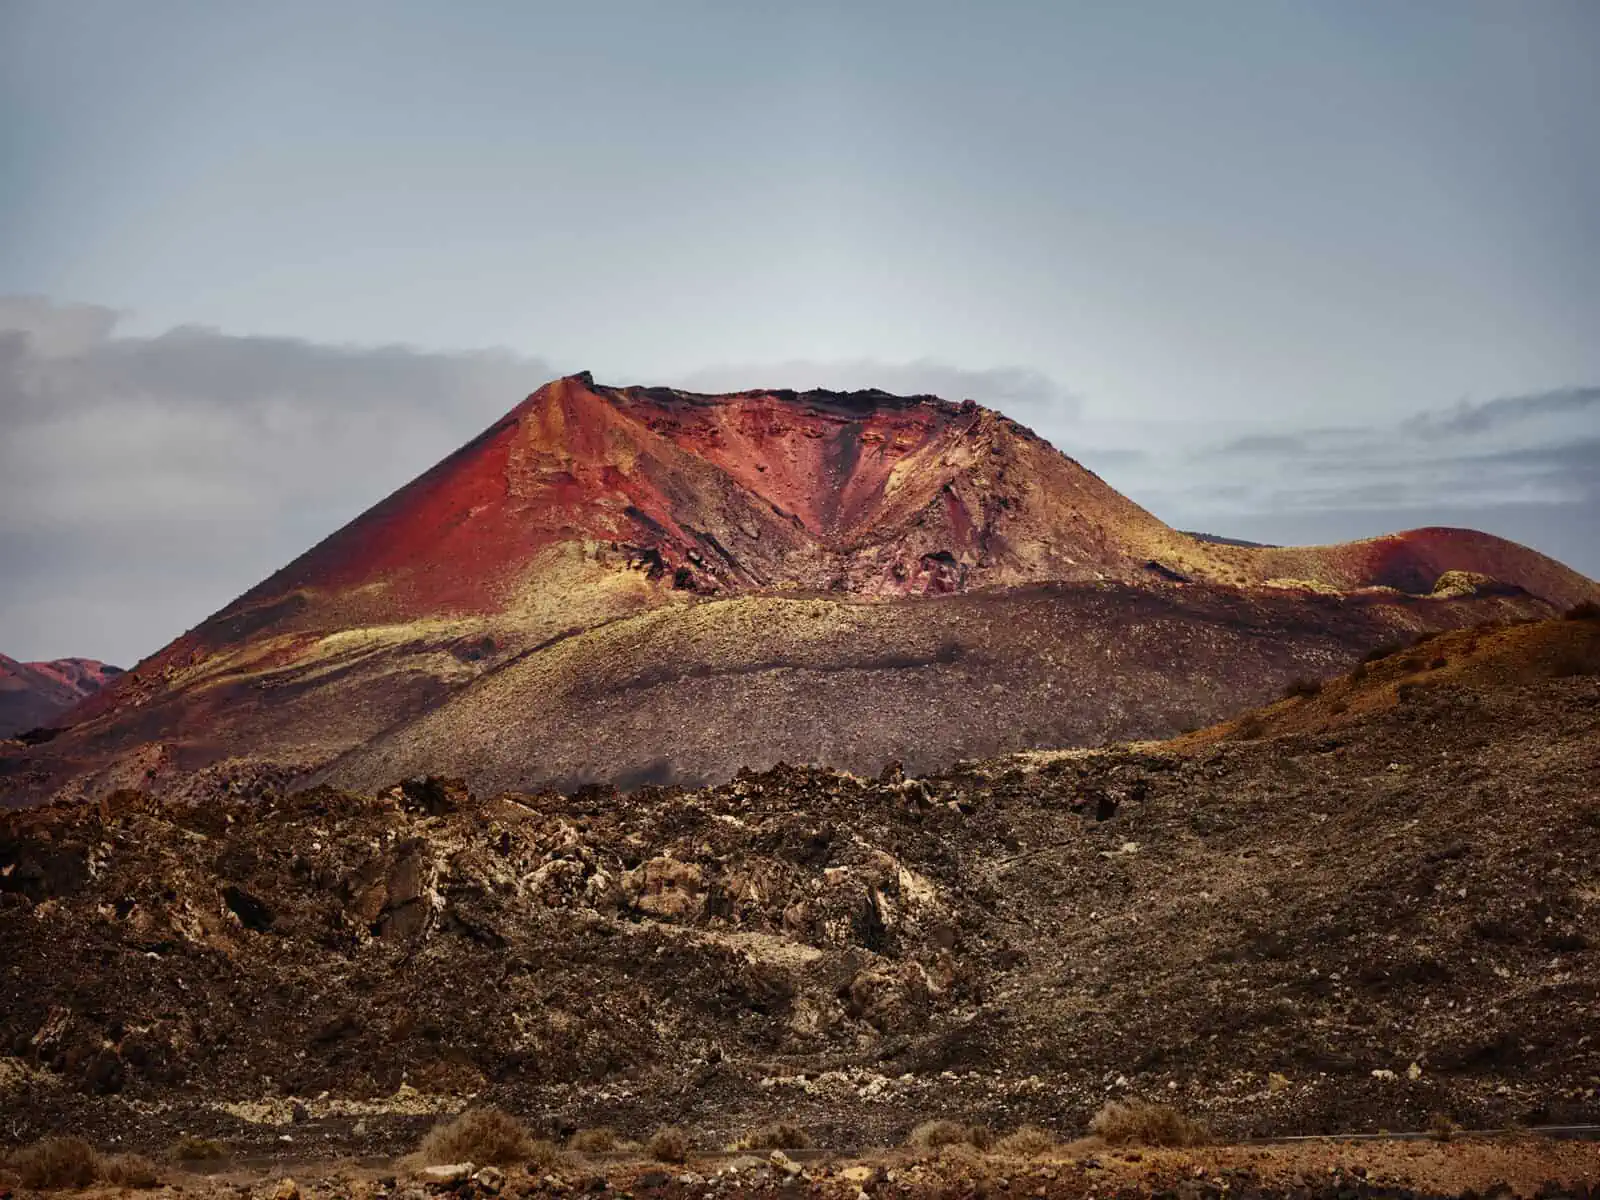 Image description: A landscape image. The foreground is framed with volcanic rubble - in deep browns and covered in green lichen. The background of the image is a volcano which is many colours of red, orange and yellow. The sky is blue with backlit …